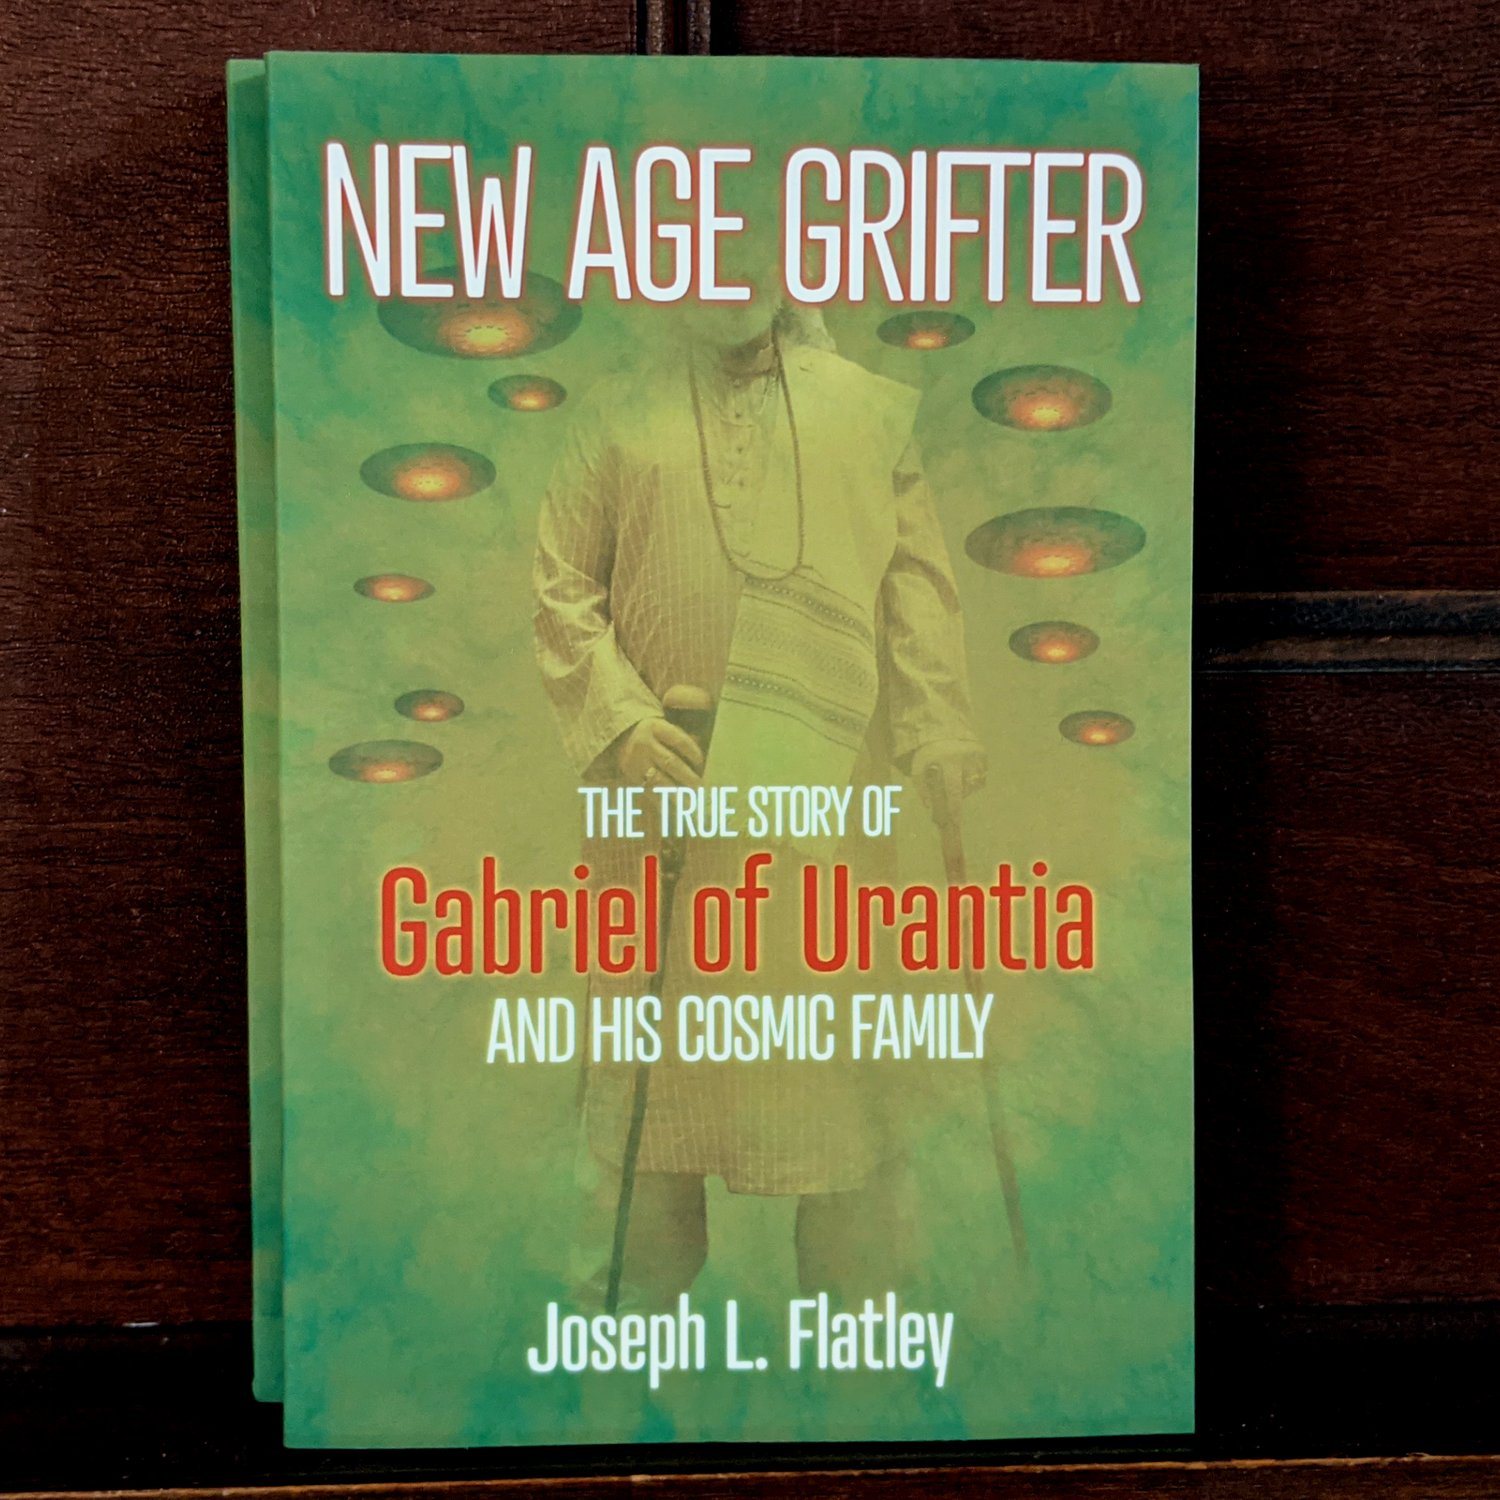 New Age Grifter (AUTOGRAPHED BY THE AUTHOR)